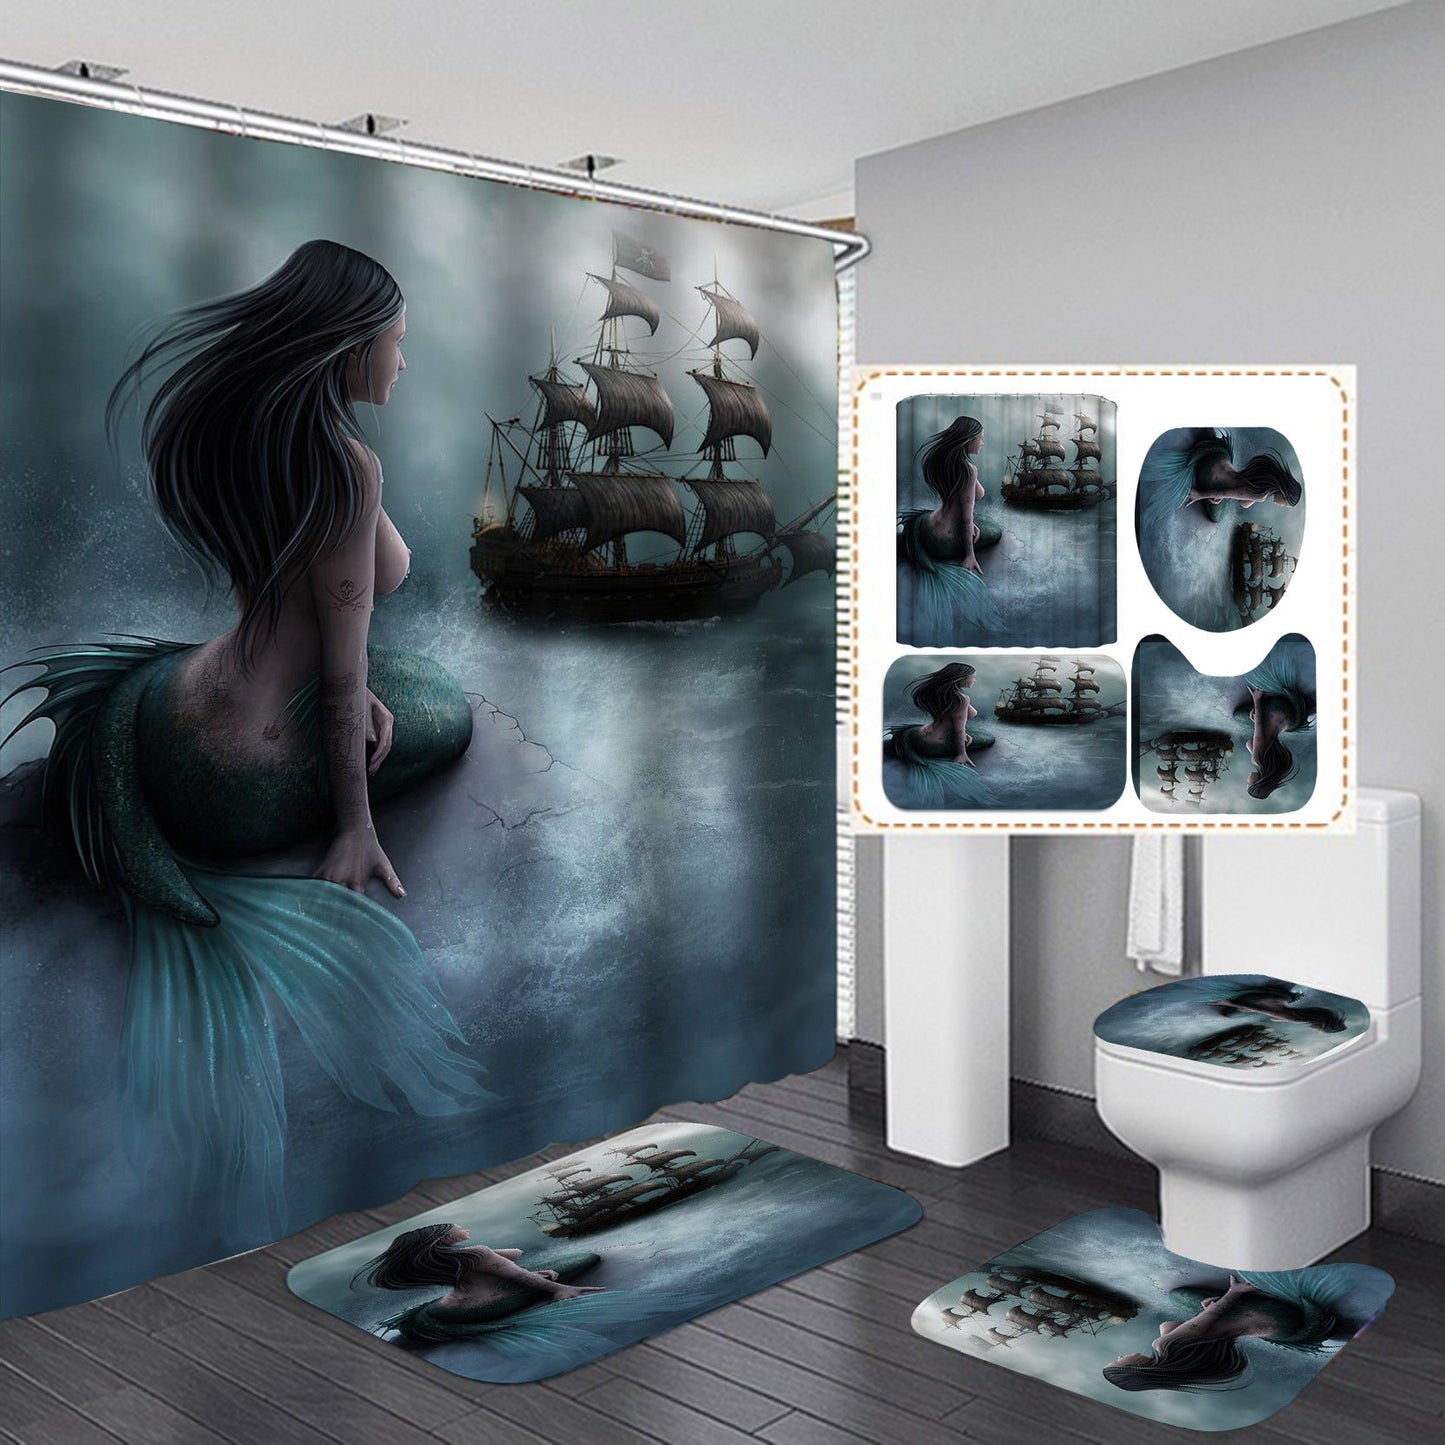 Cartoon Mermaid Design Shower Curtain Bathroom SetsNon-Slip Toilet Lid Cover-Shower Curtain-180×180cm Shower Curtain Only-4-Free Shipping at meselling99